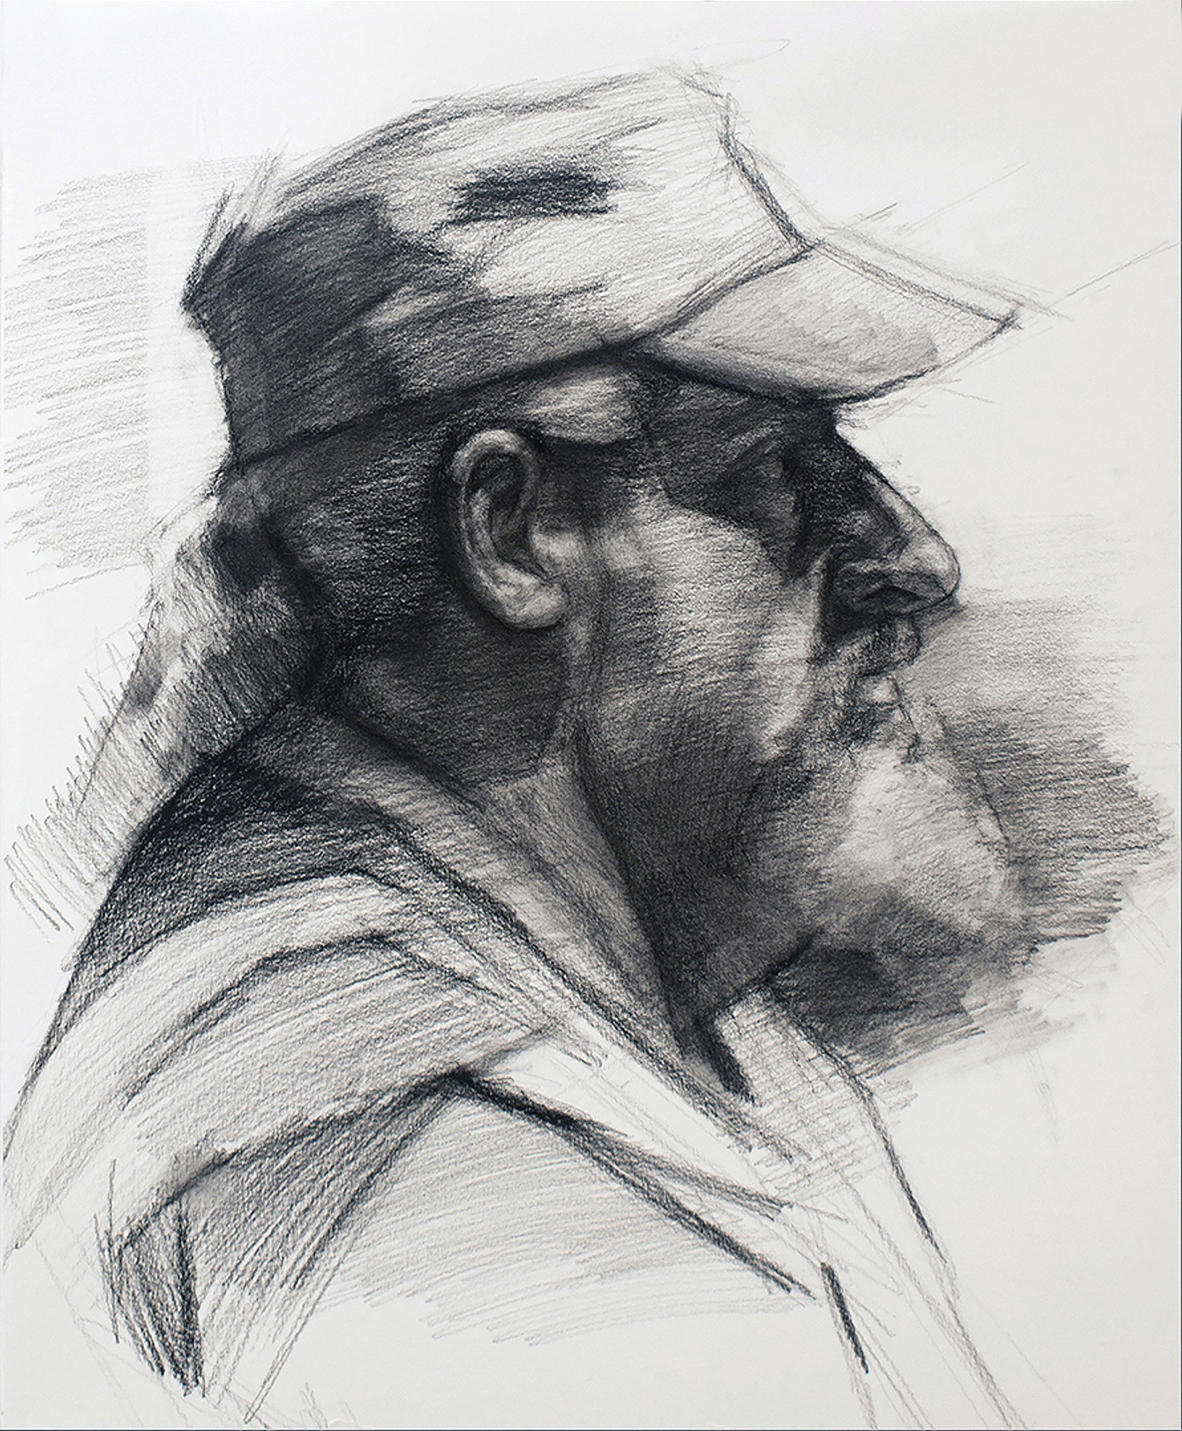   Scott in Profile  Charcoal on Paper 15" x 20" 